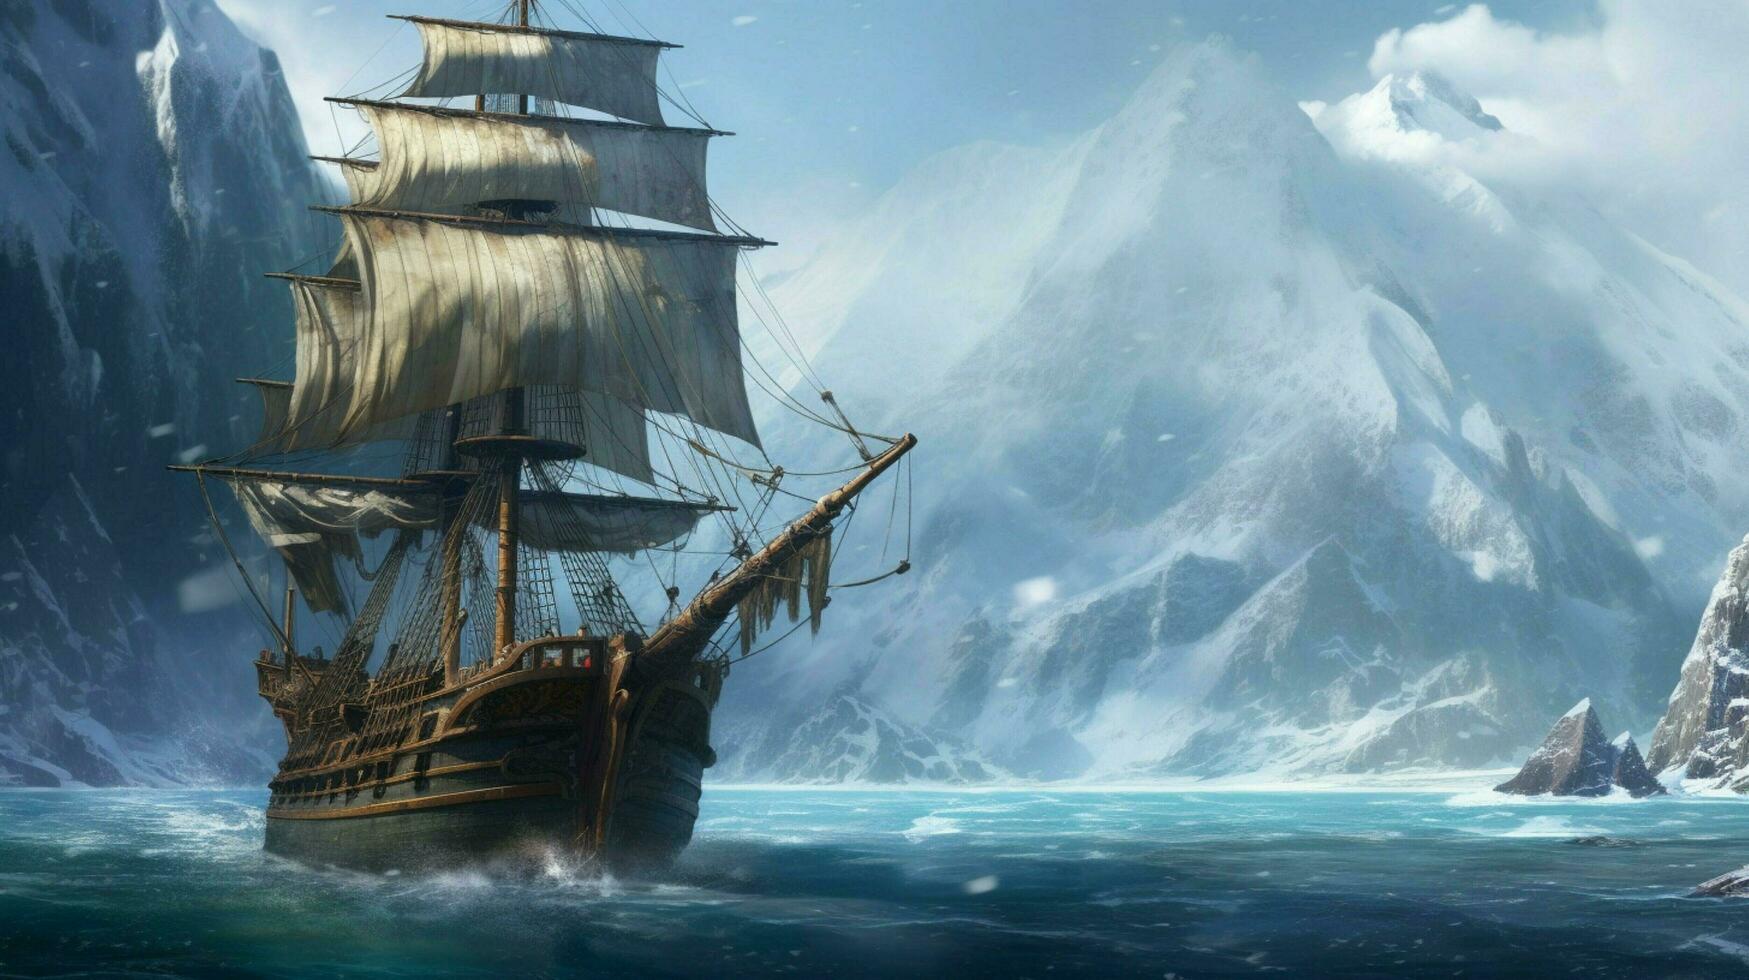 vking ship sails past mountain range with snowy p photo